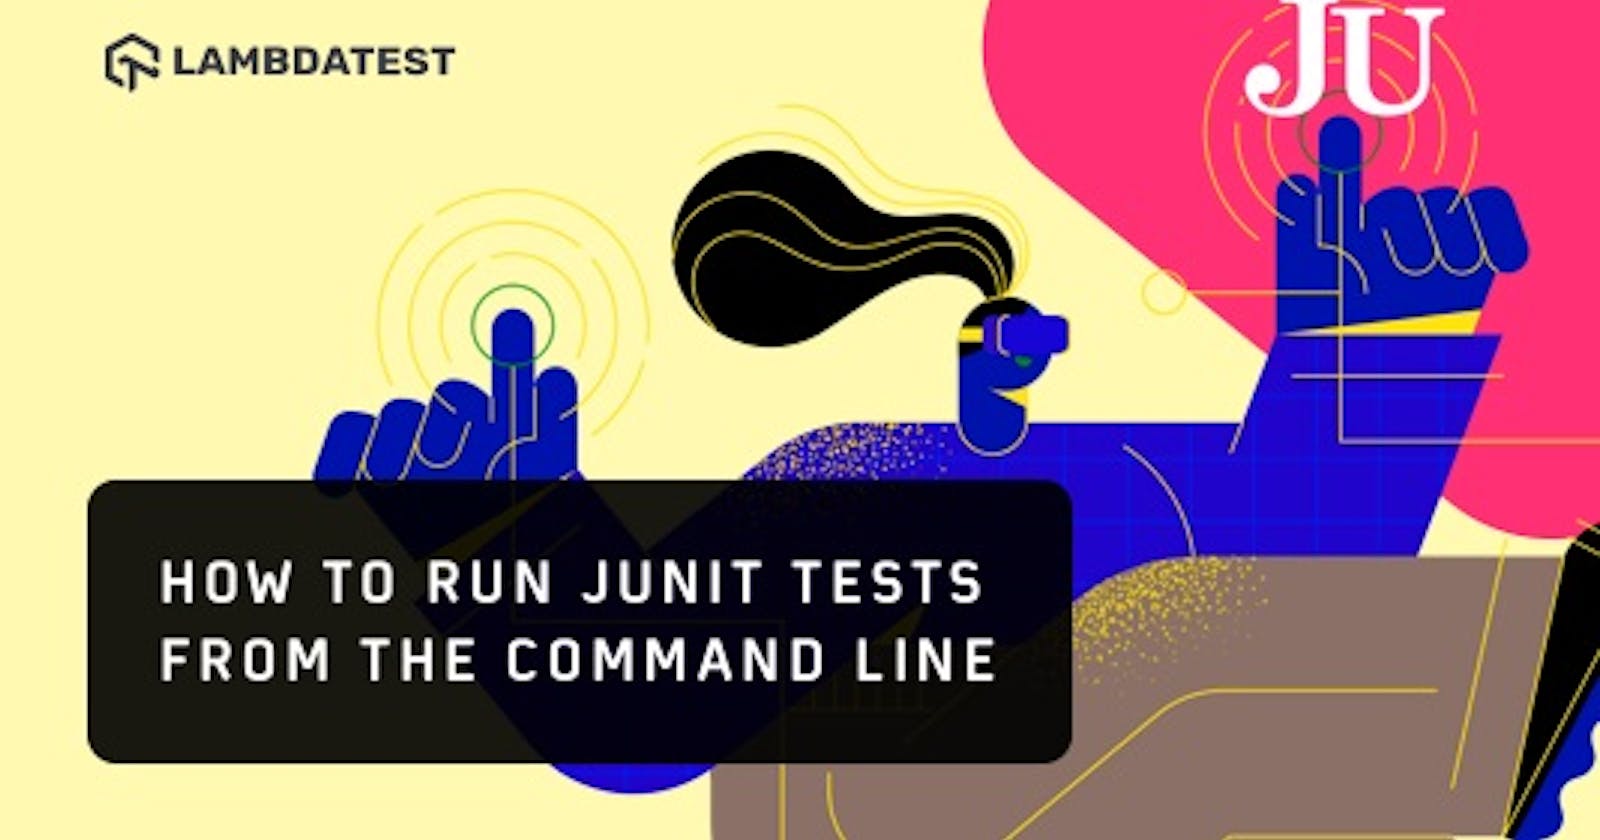 How To Run Junit Tests From The Command Line